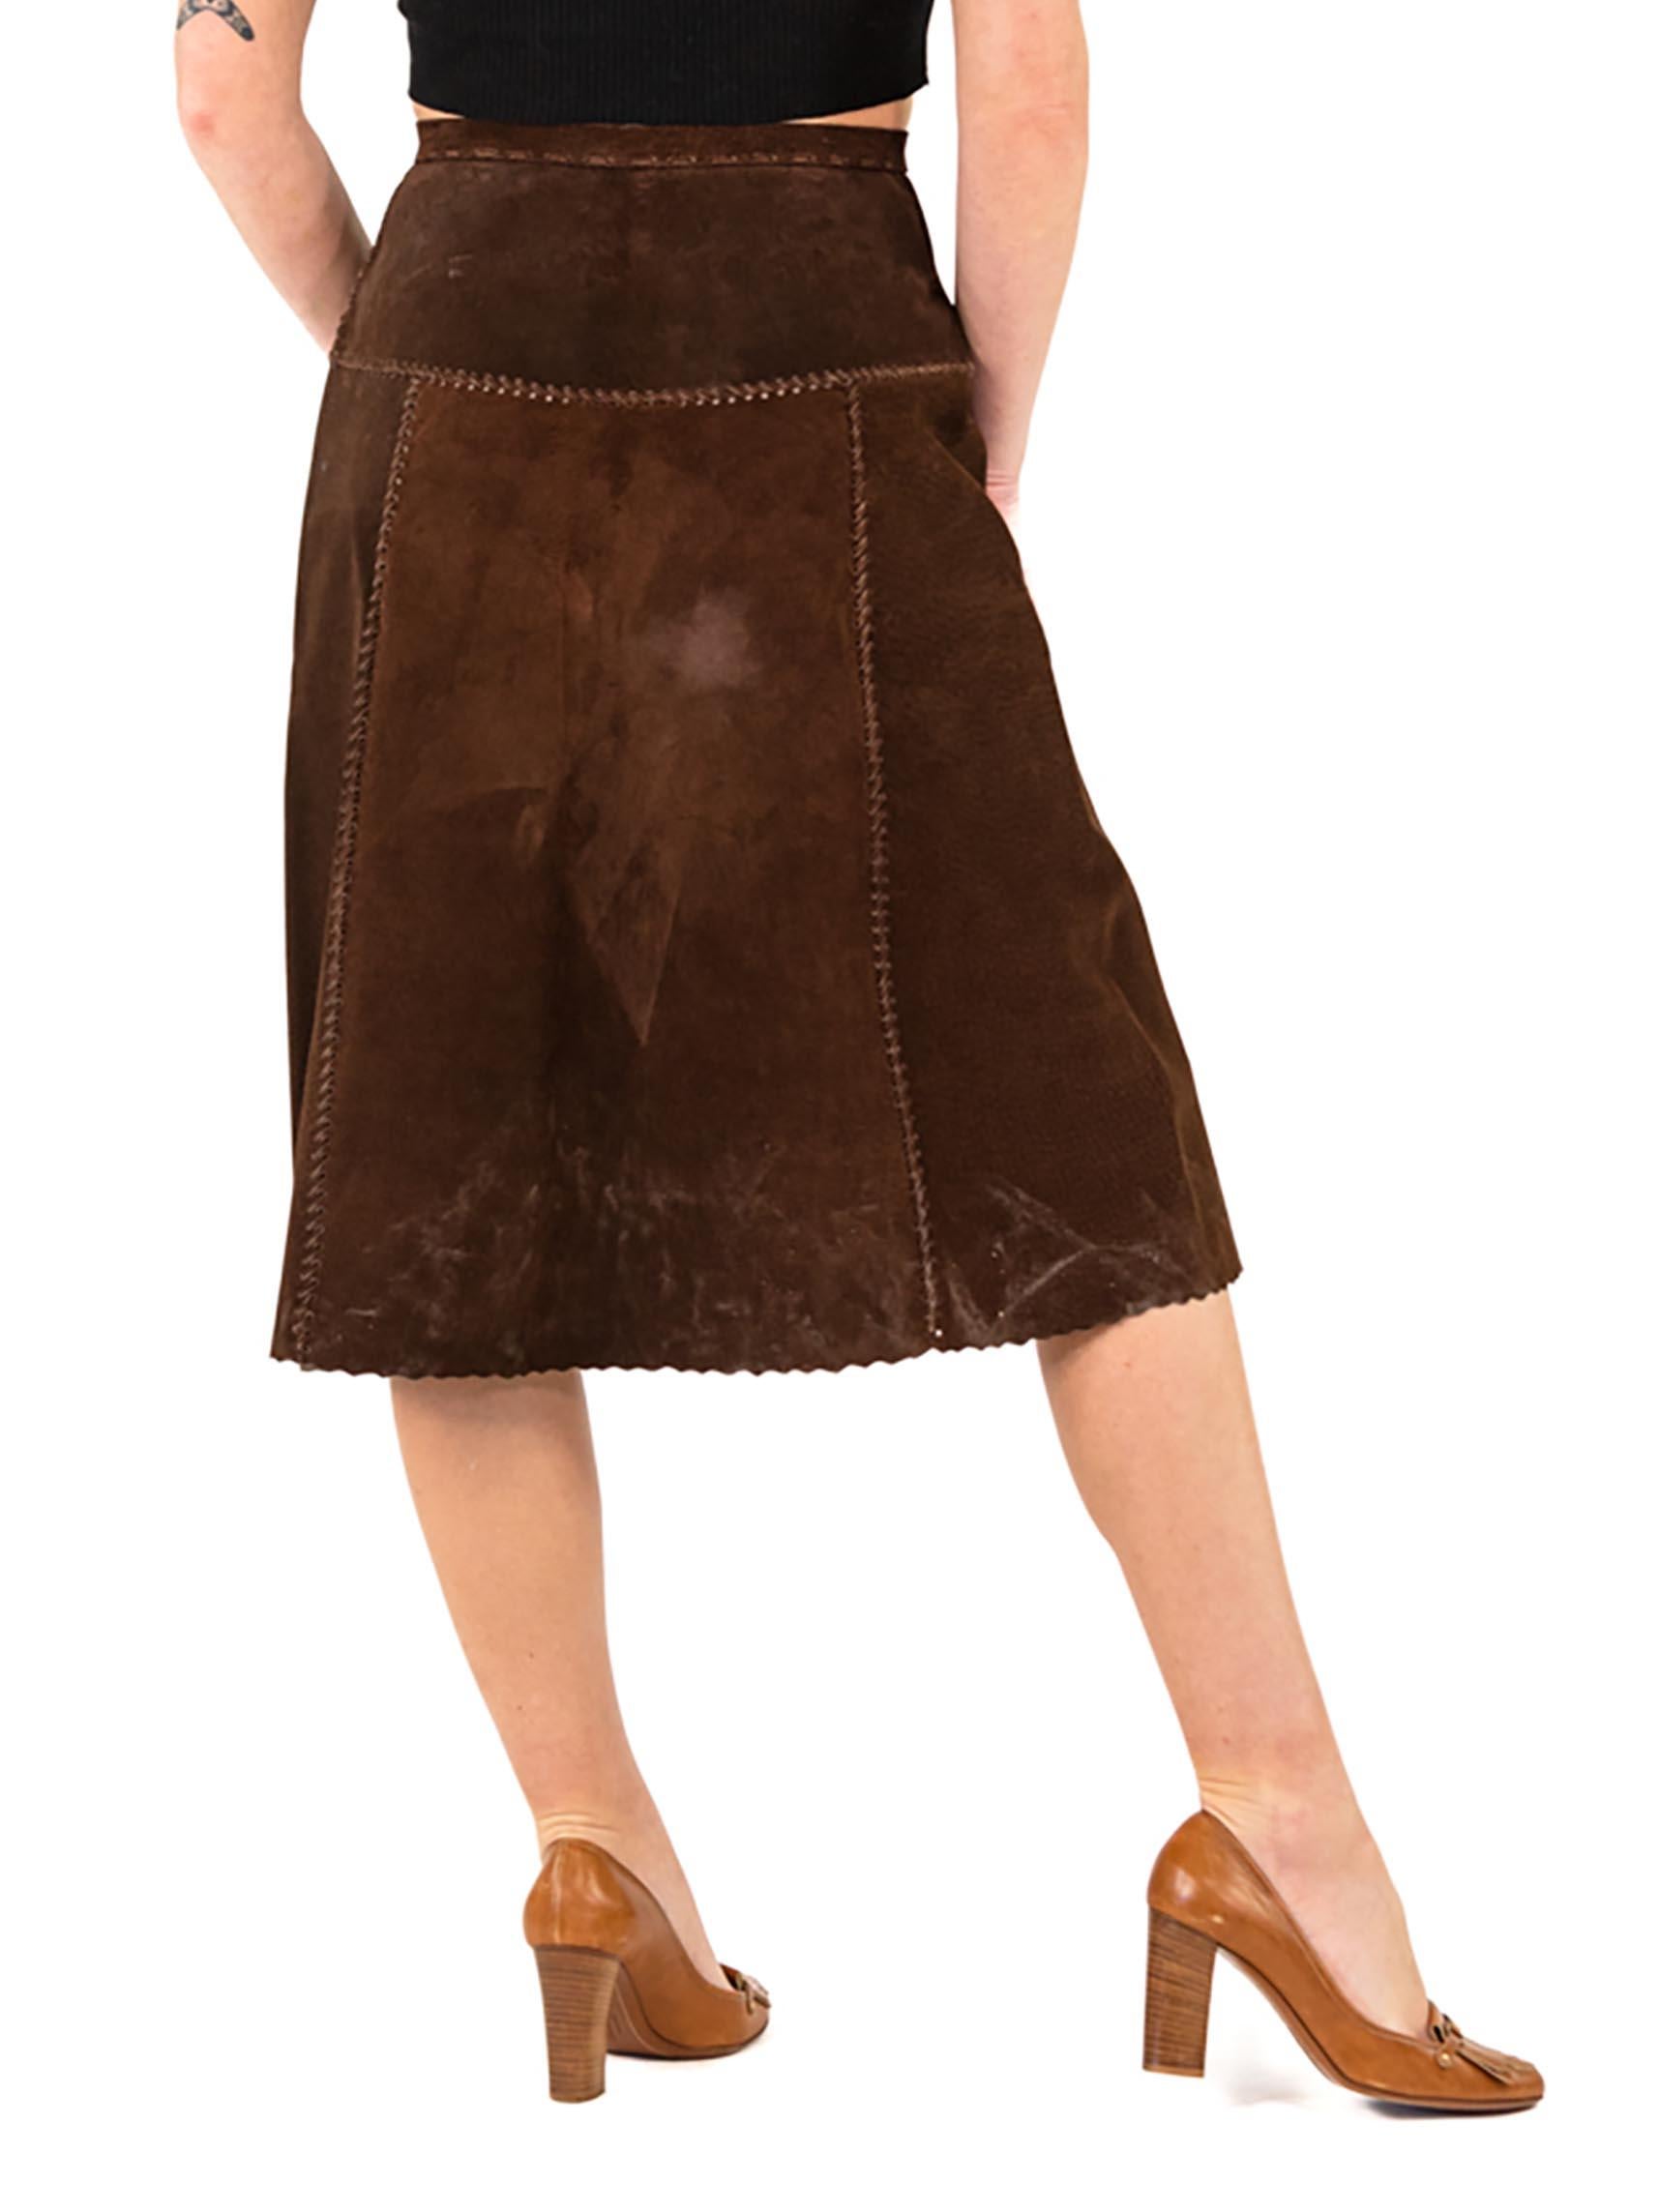 1970S Dark Chocolate Brown Suede Skirt With Snaps 4